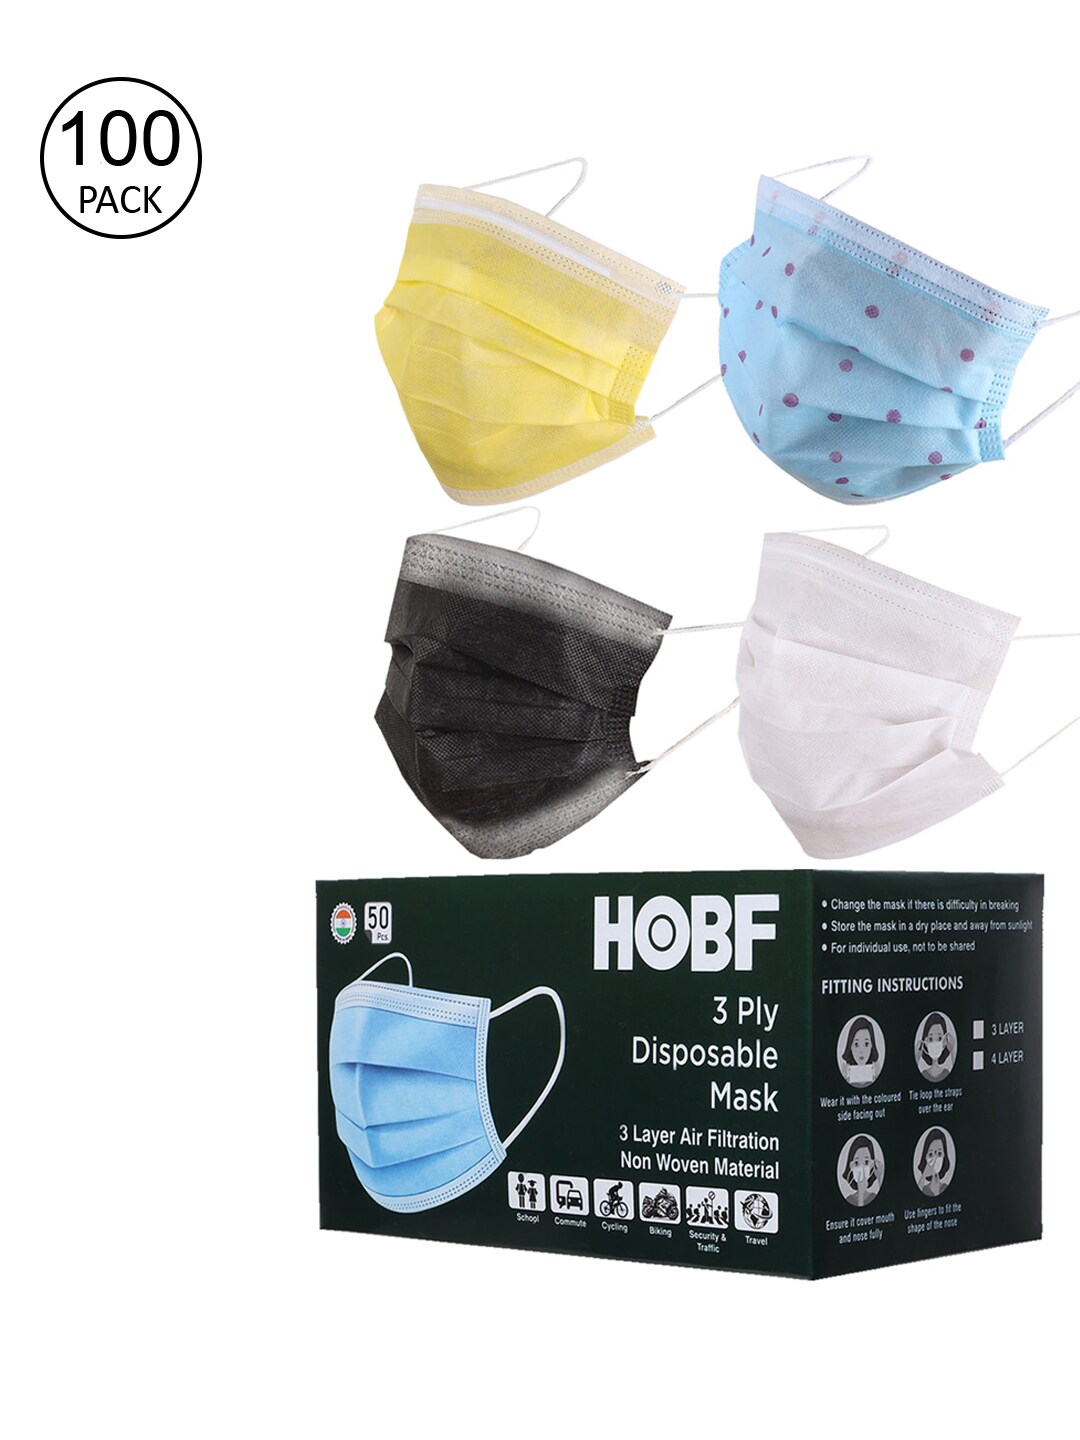 Swiss Design Pack Of 100 Assorted 3-Ply Mask With Nose-Pin Price in India